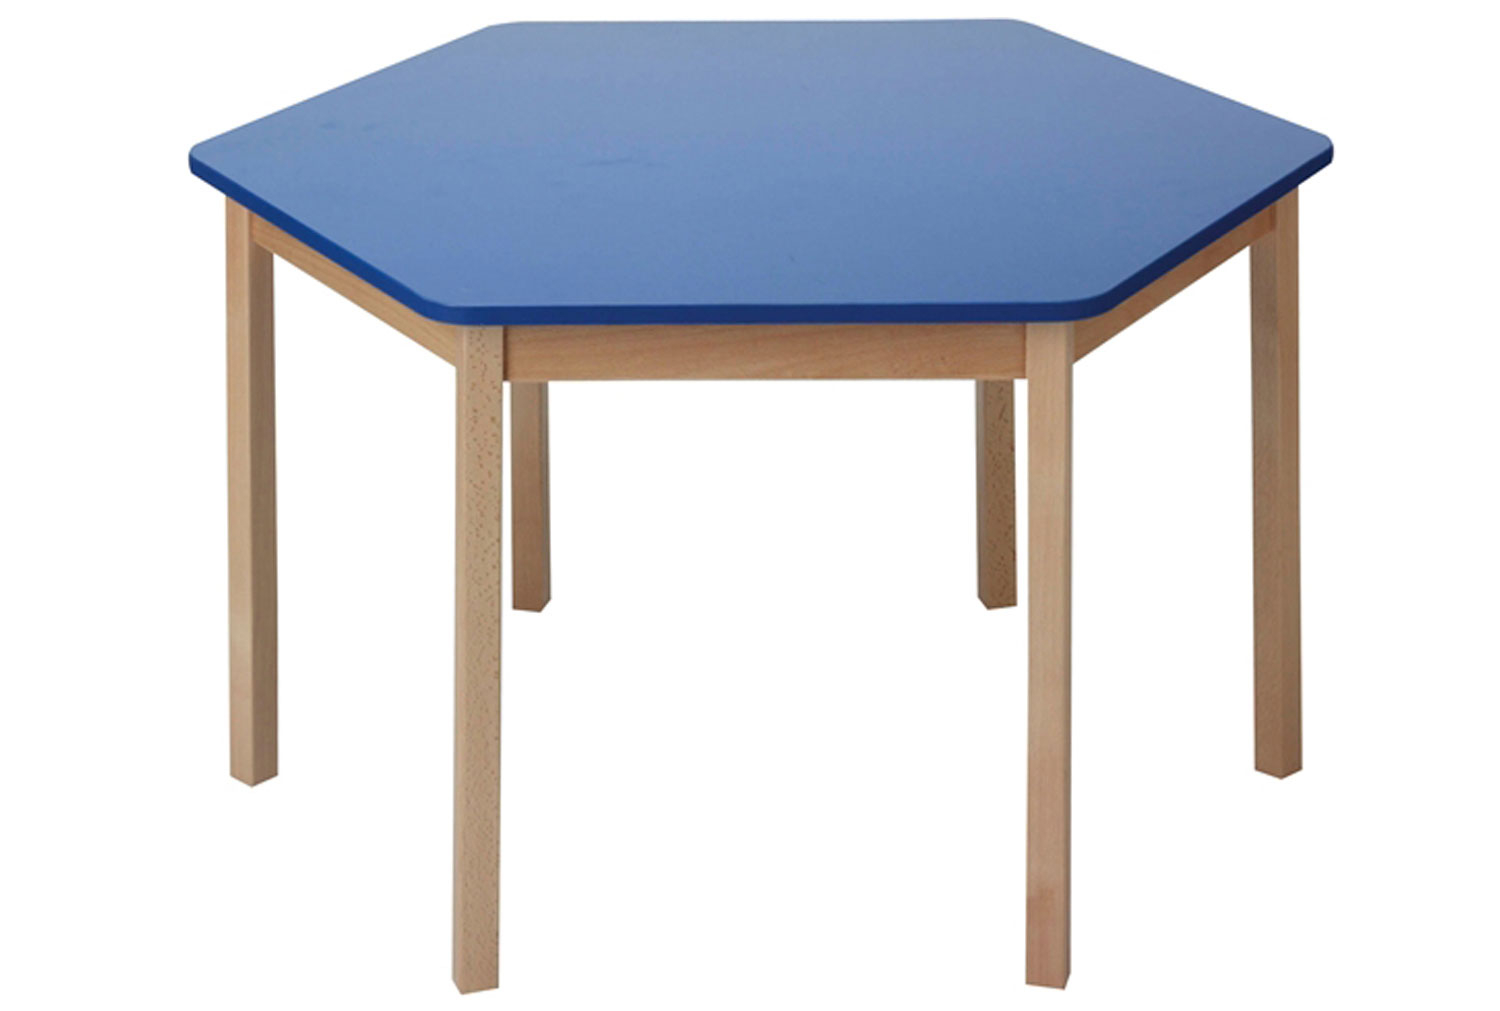 Early Years Natural Wooden Hexagonal Classroom Table, 5-7 Years - 55h (cm), Blue